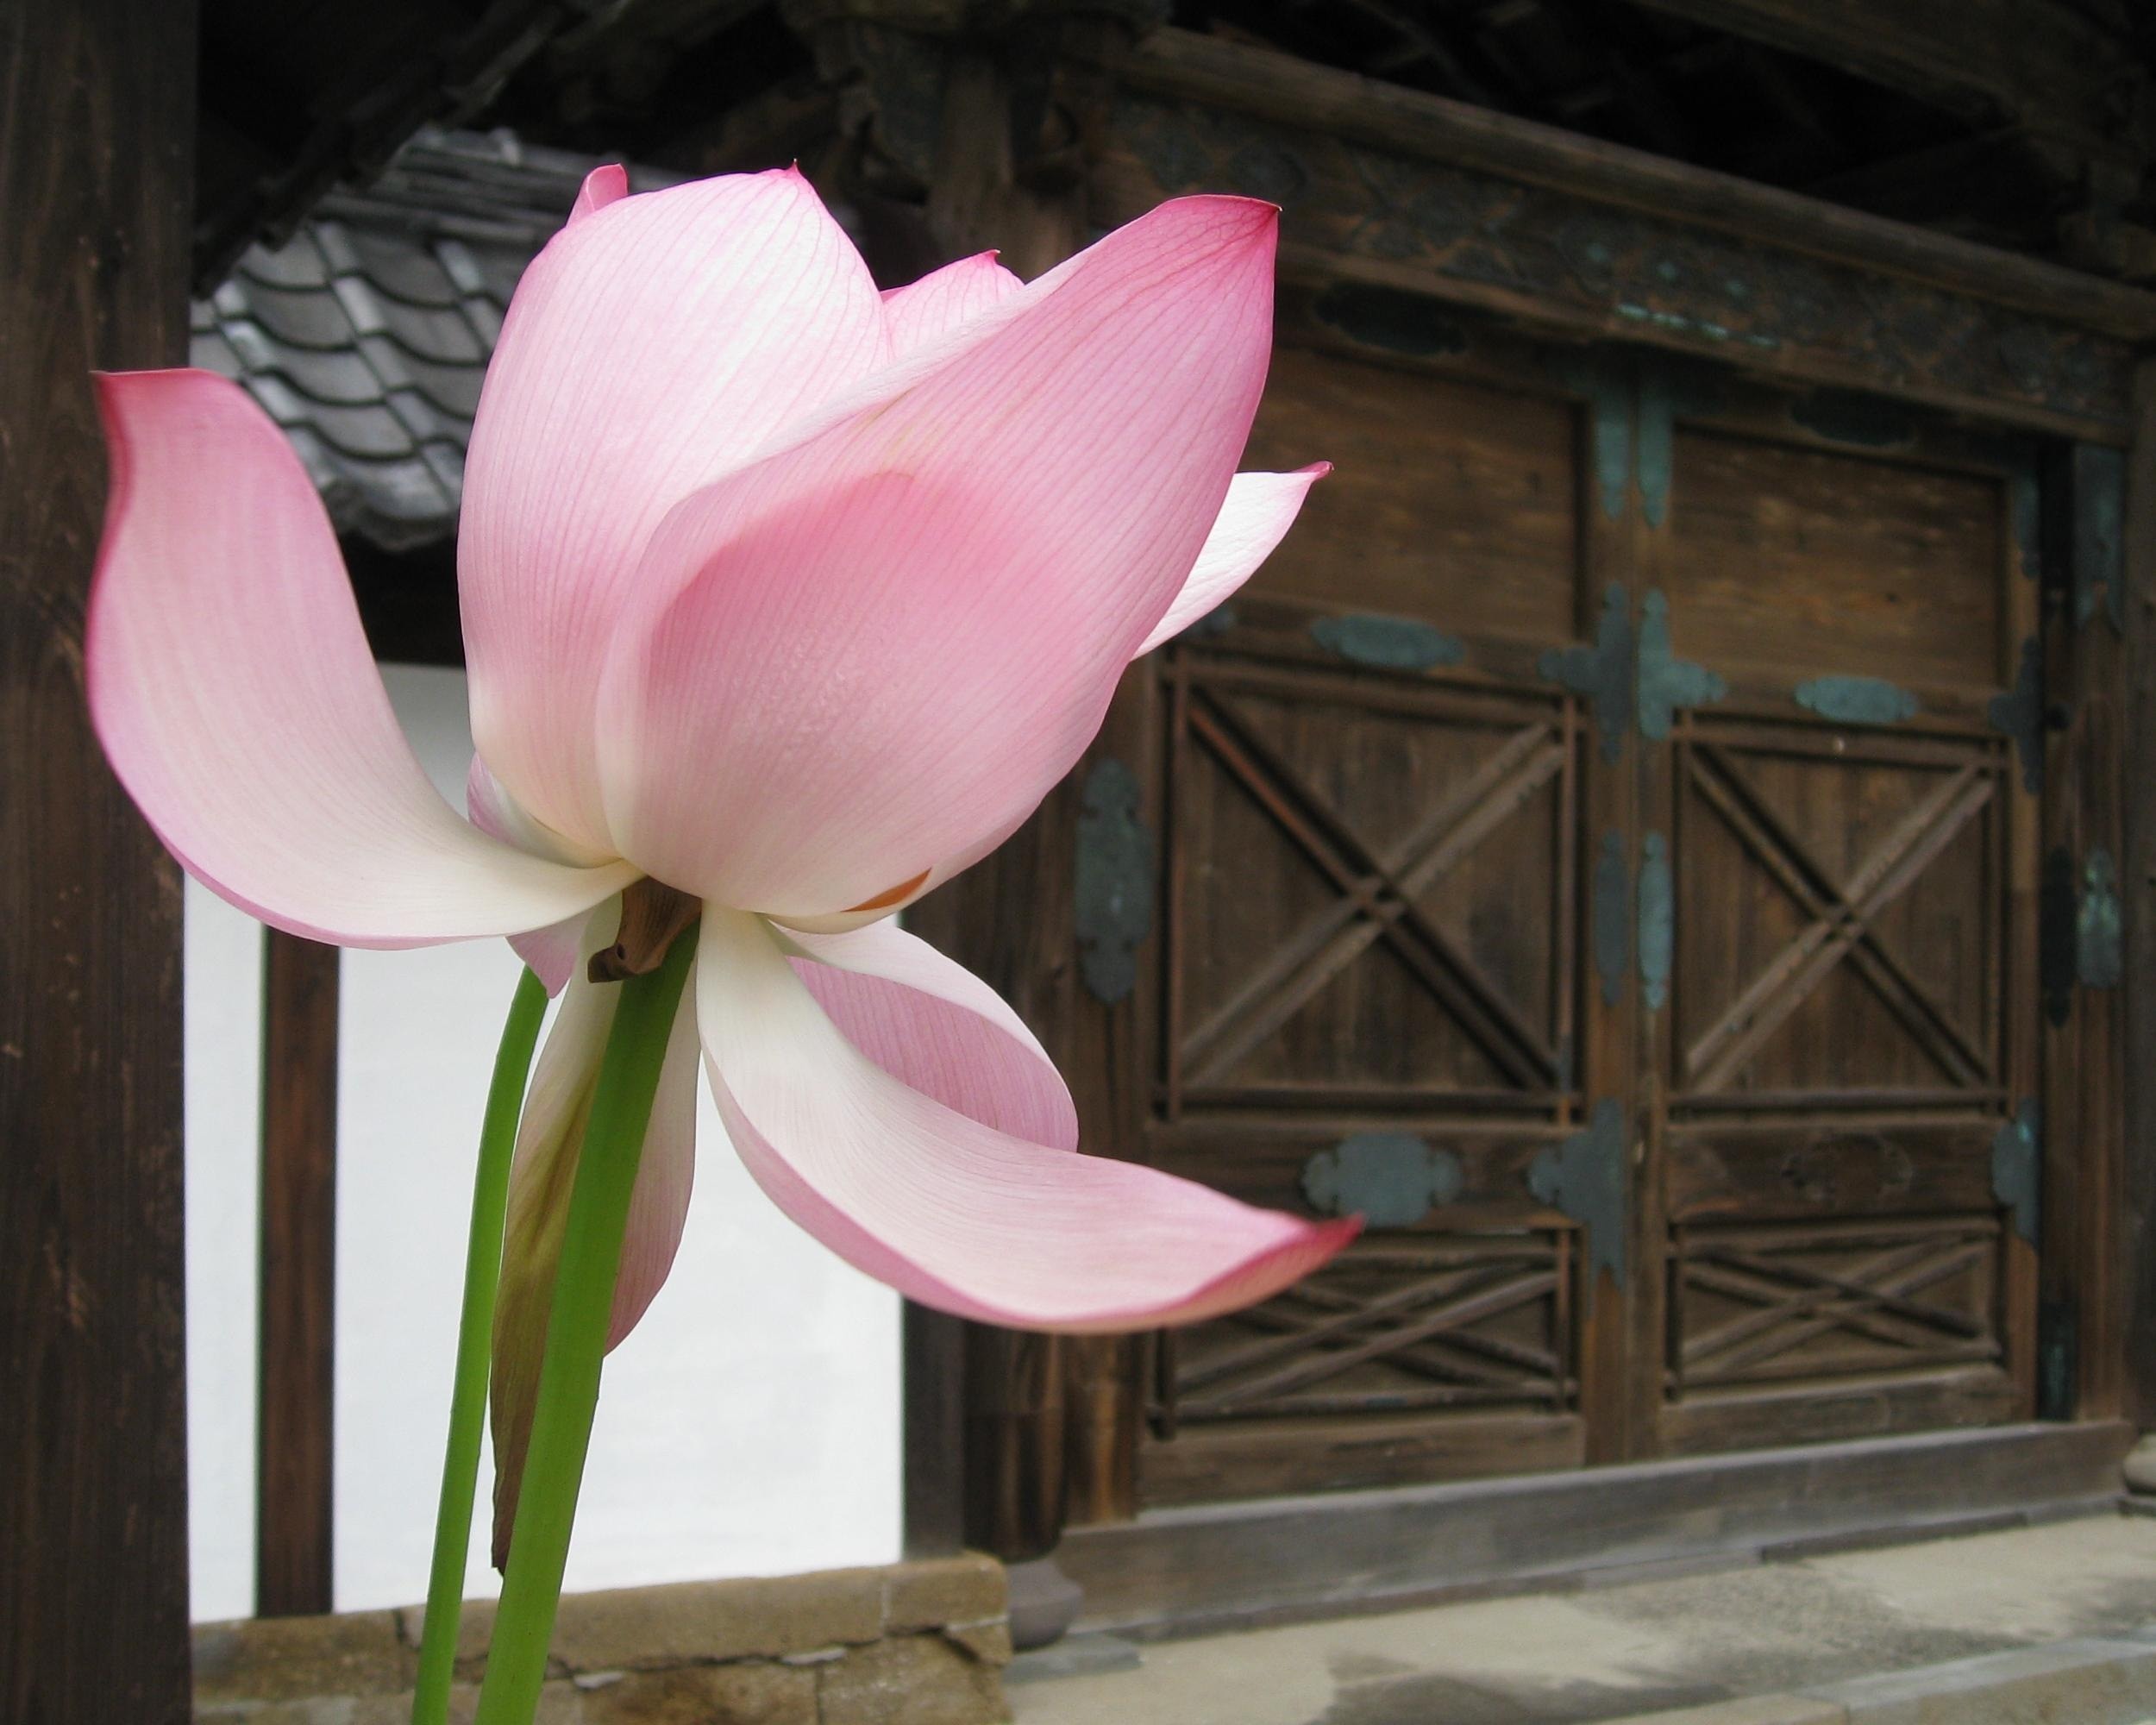 pink and white flower near brown wooden door during daytime